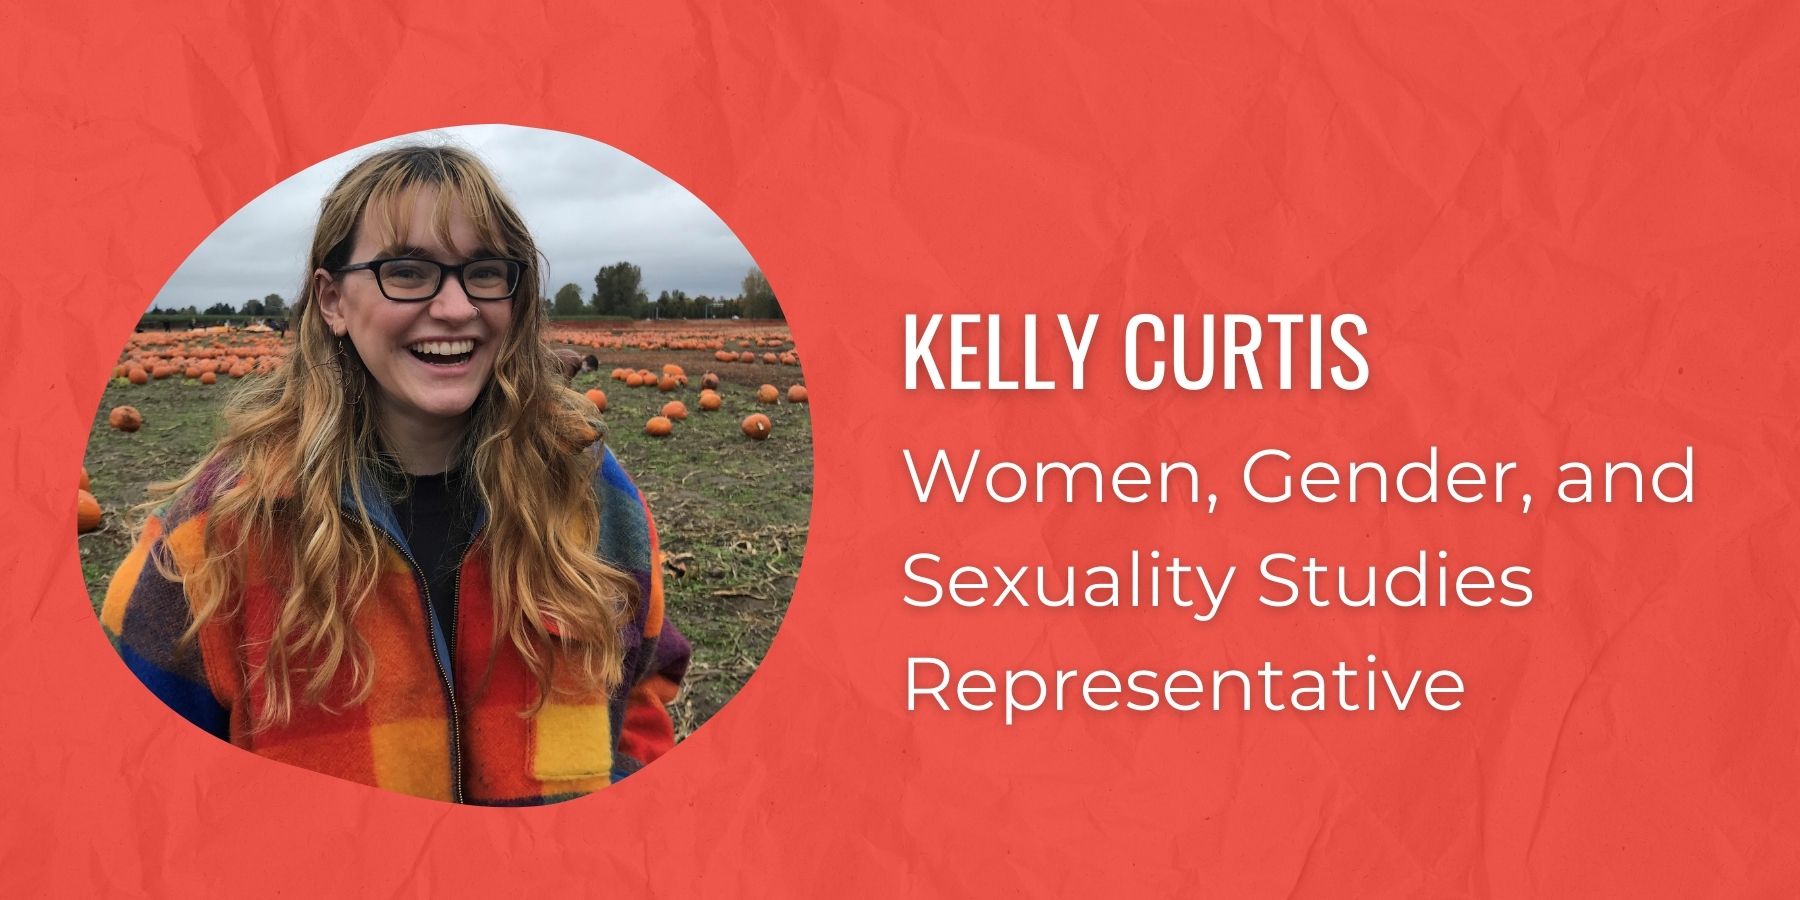 Photo of Kelly Curtis and text: Women, Gender, and Sexuality Studies Representative